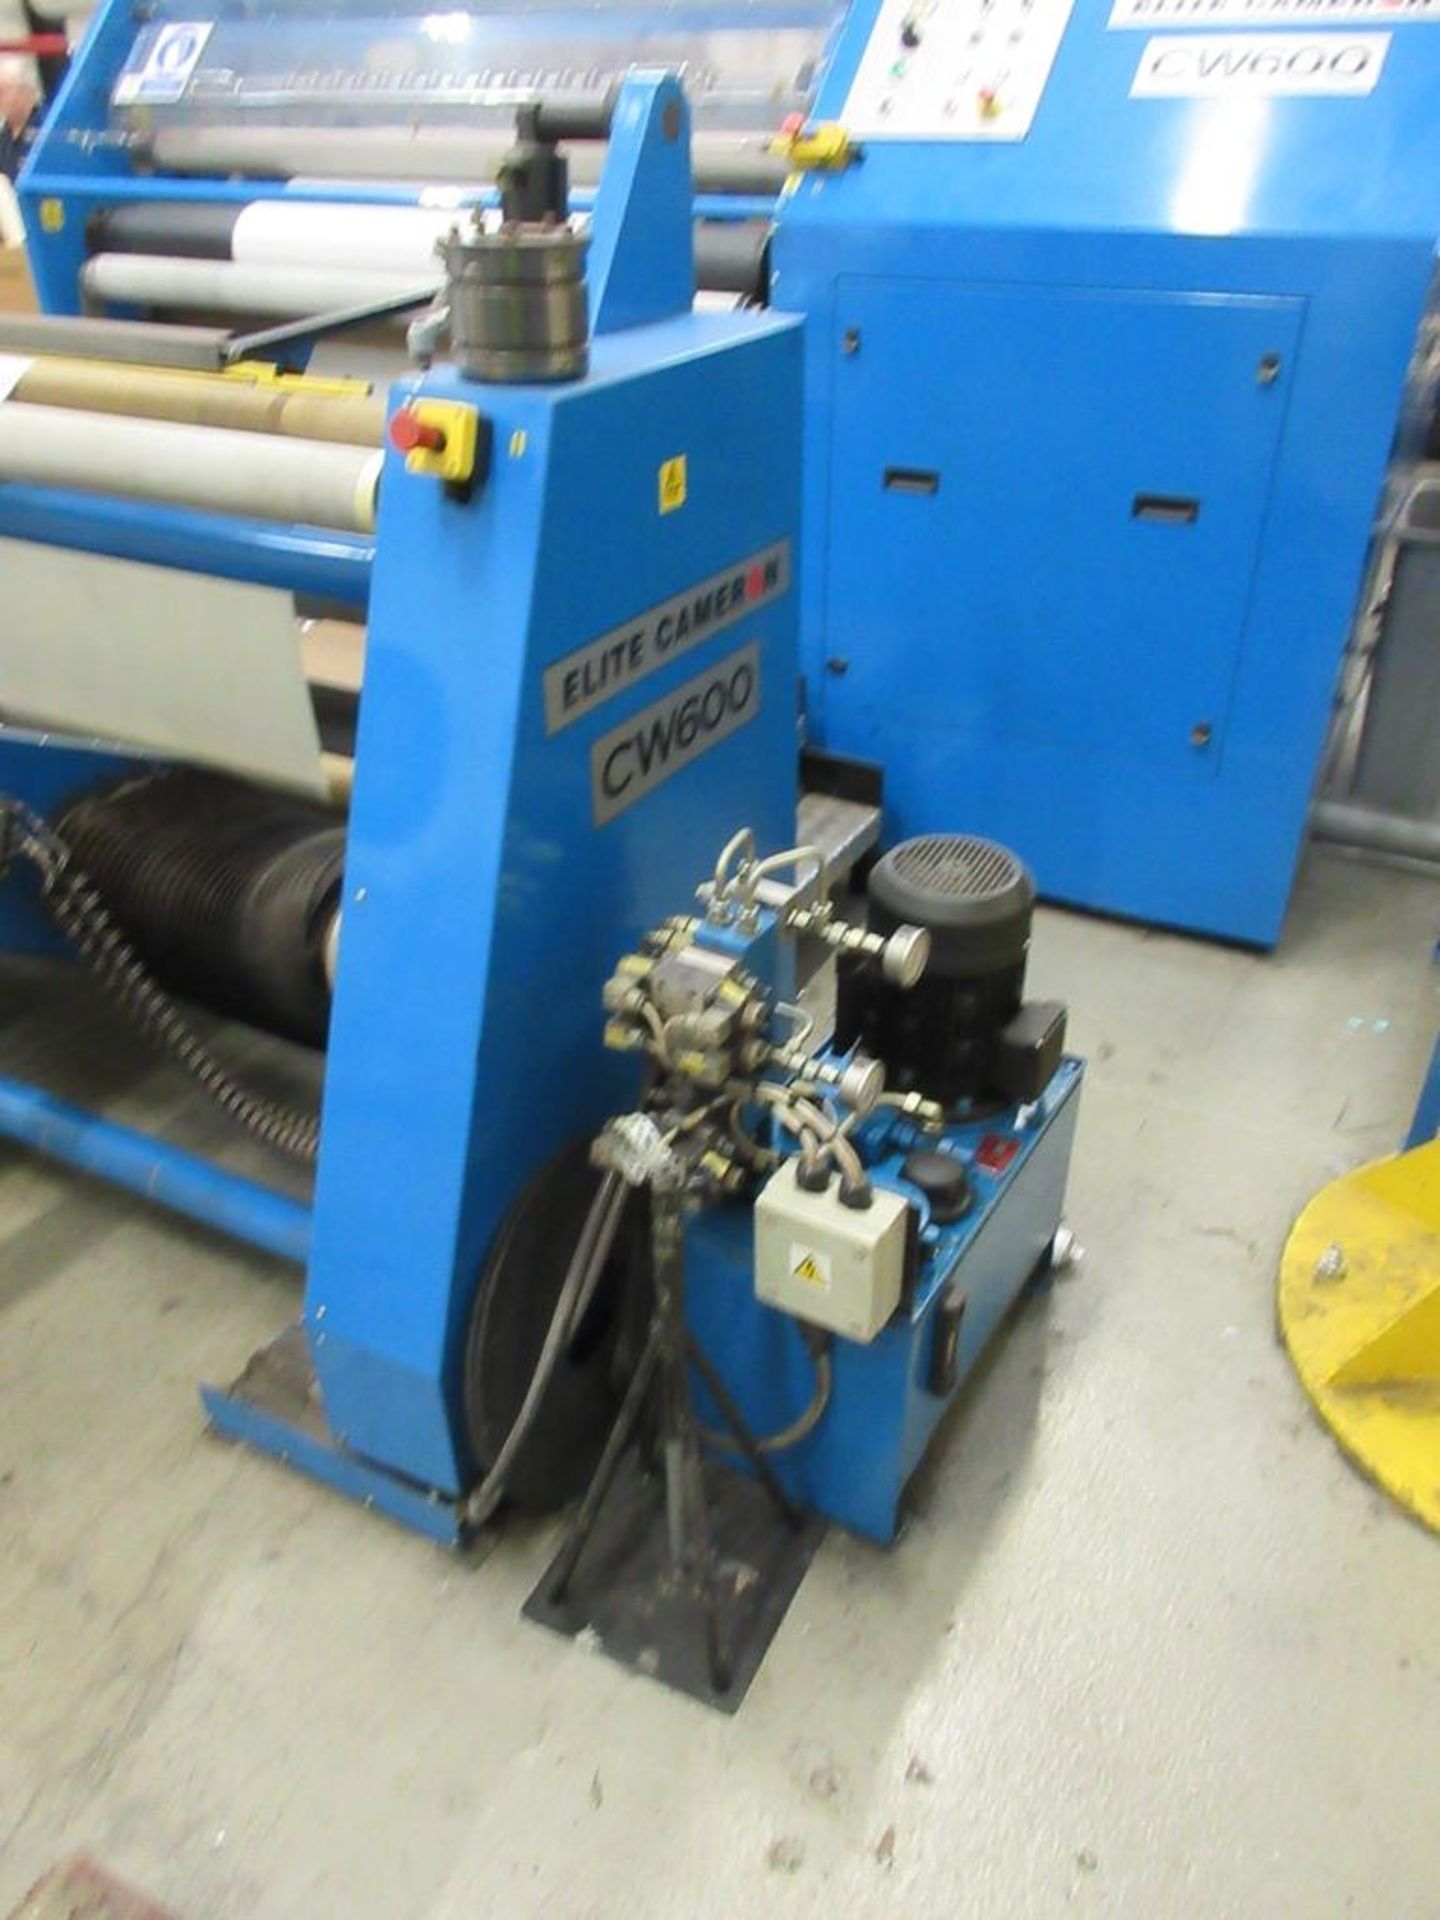 Elite Cameron CW600 automatic slitting machine, s/n: MO2030 (2001), capacity 3000kg with - - Image 3 of 16